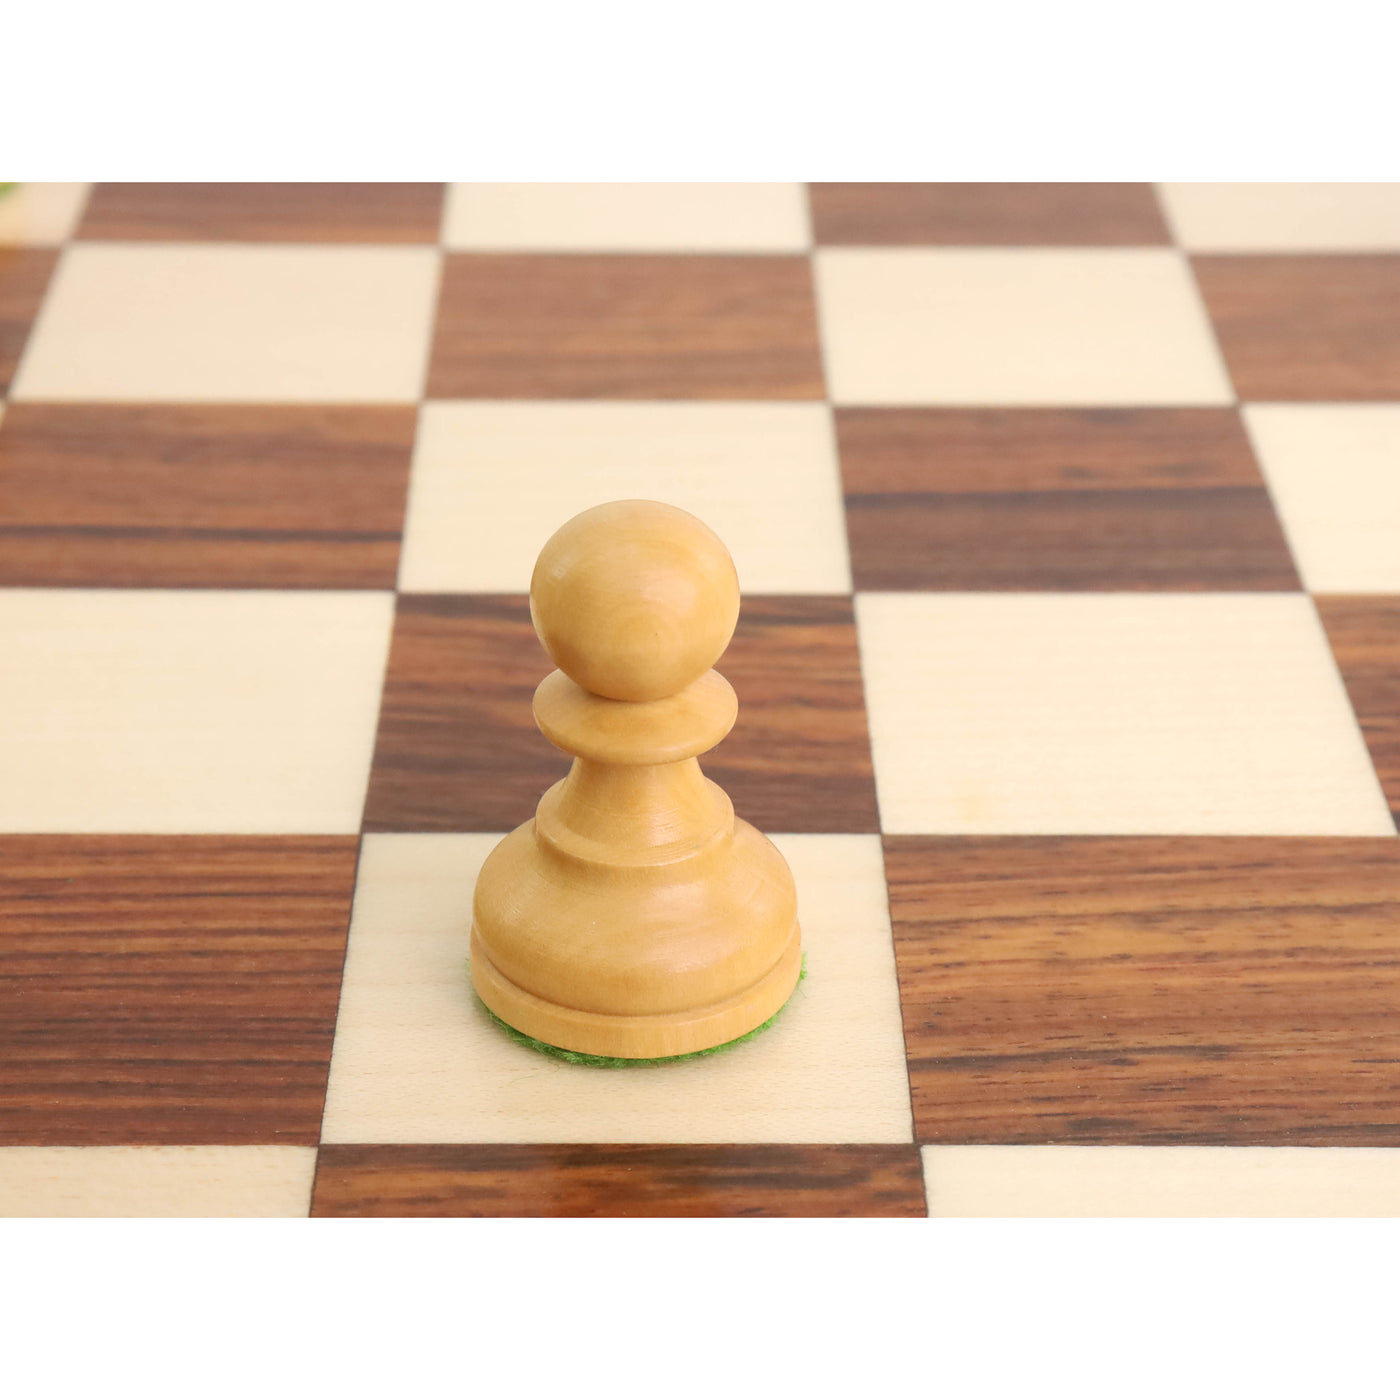 Combo of Compact Size Tournament Chess set - Pieces in Golden Rosewood with Board and Box